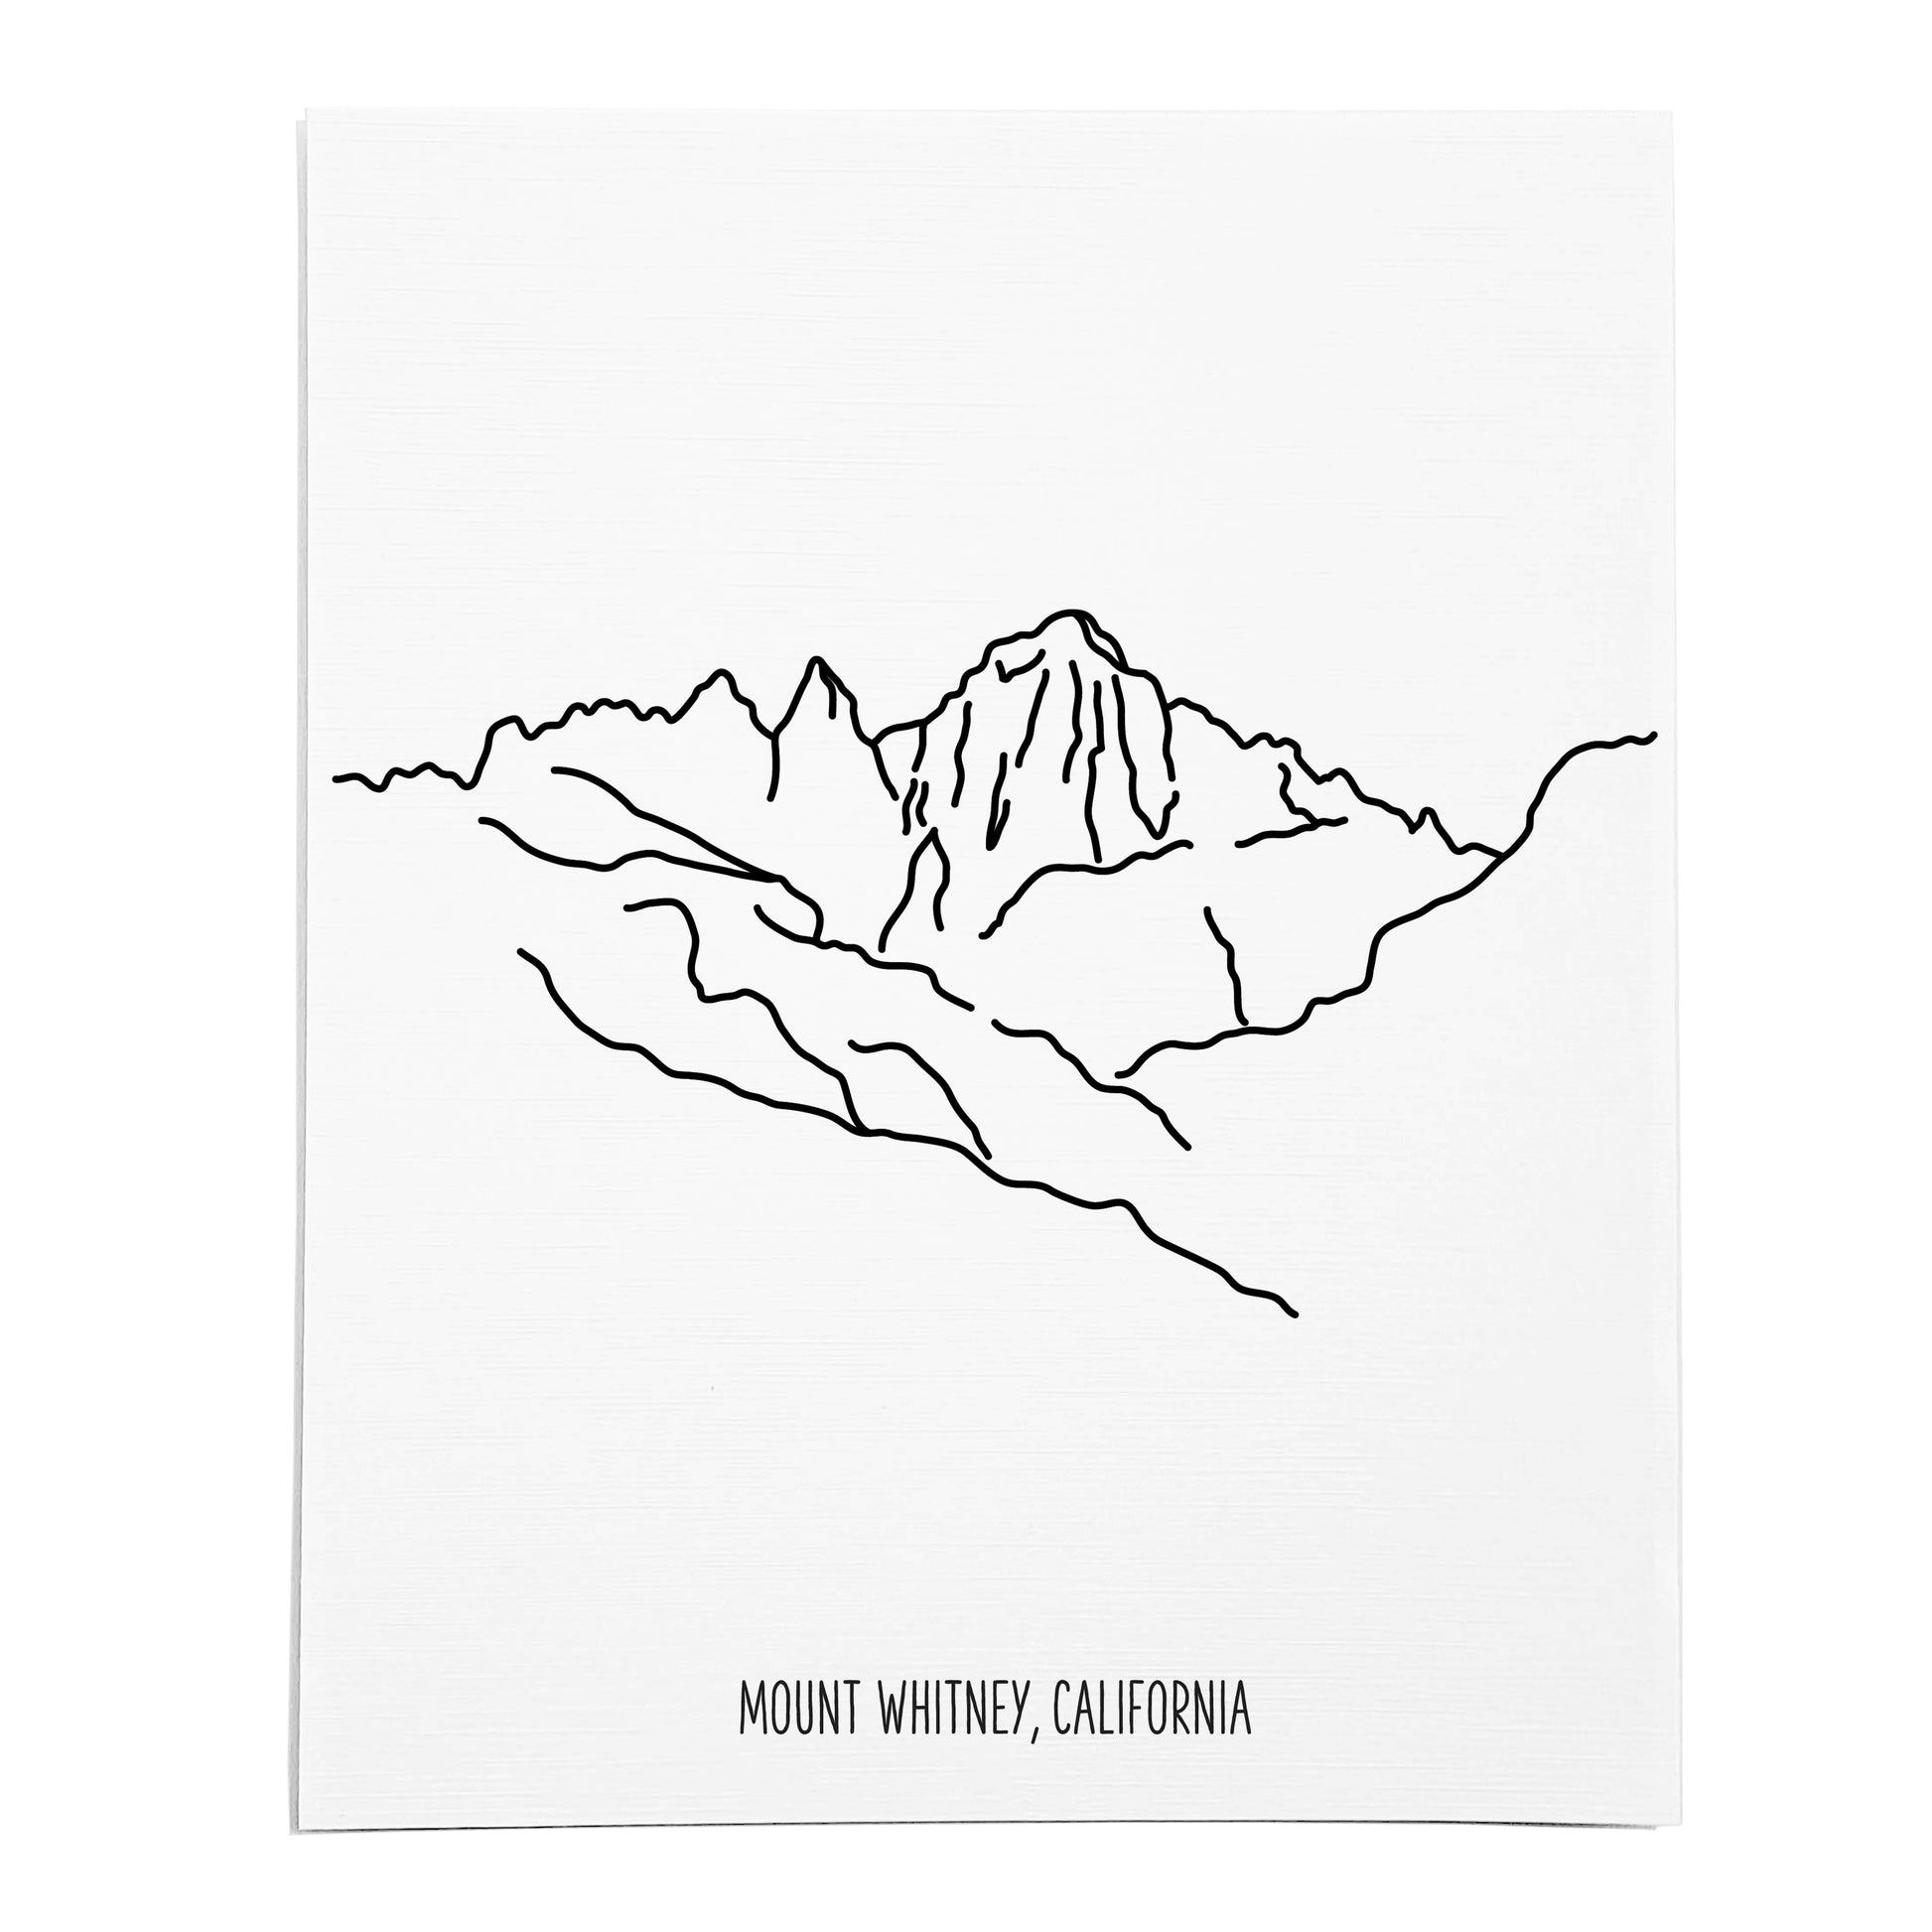 An art print featuring a line drawing of Mount Whitney on white linen paper 